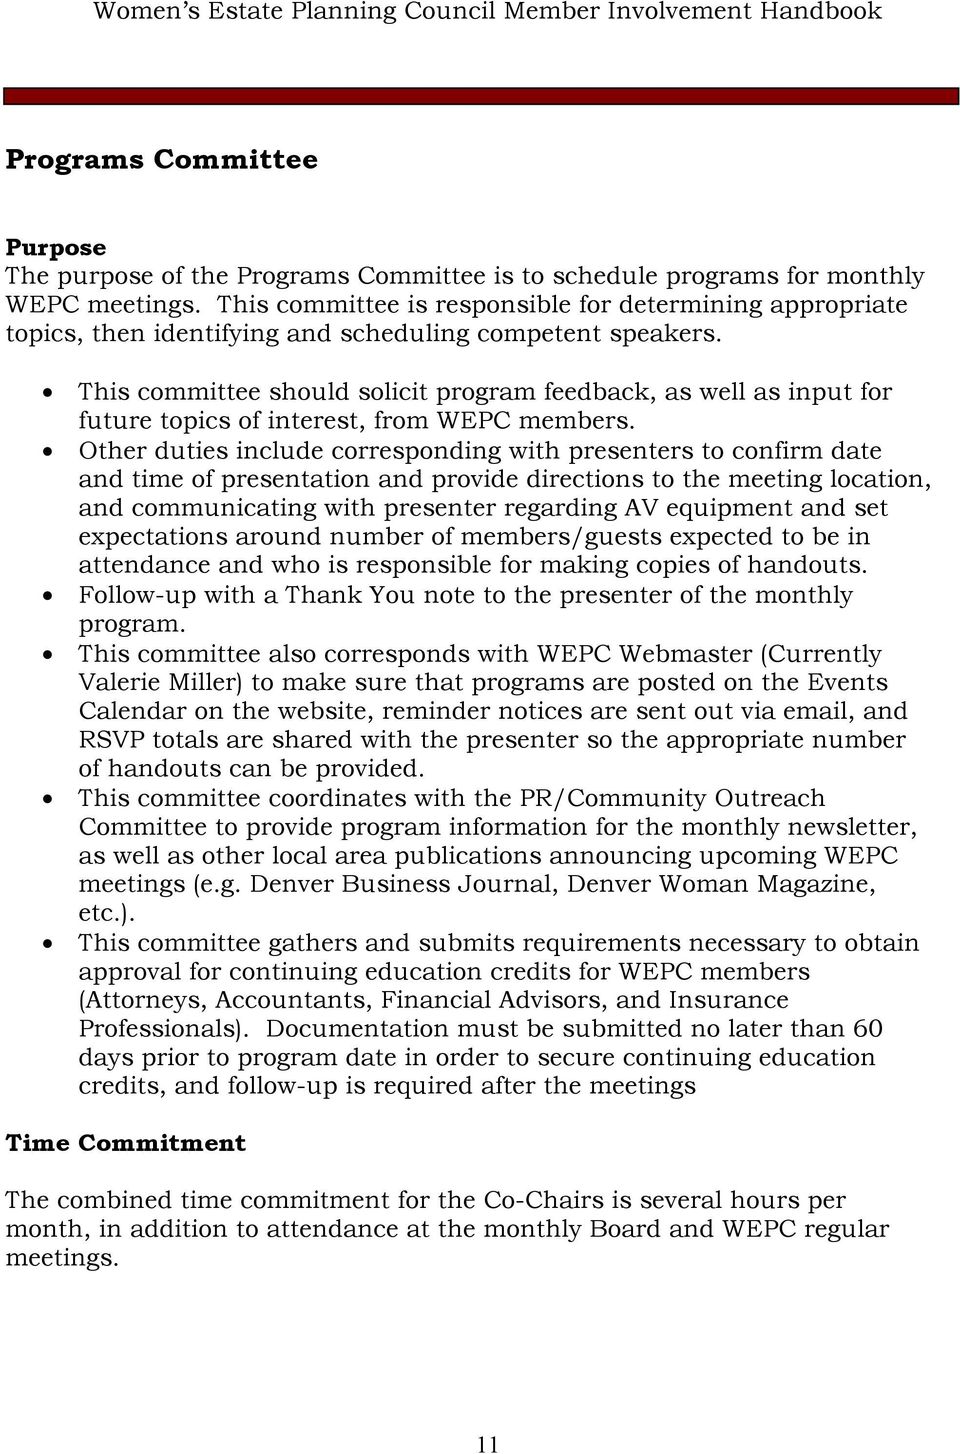 This committee should solicit program feedback, as well as input for future topics of interest, from WEPC members.